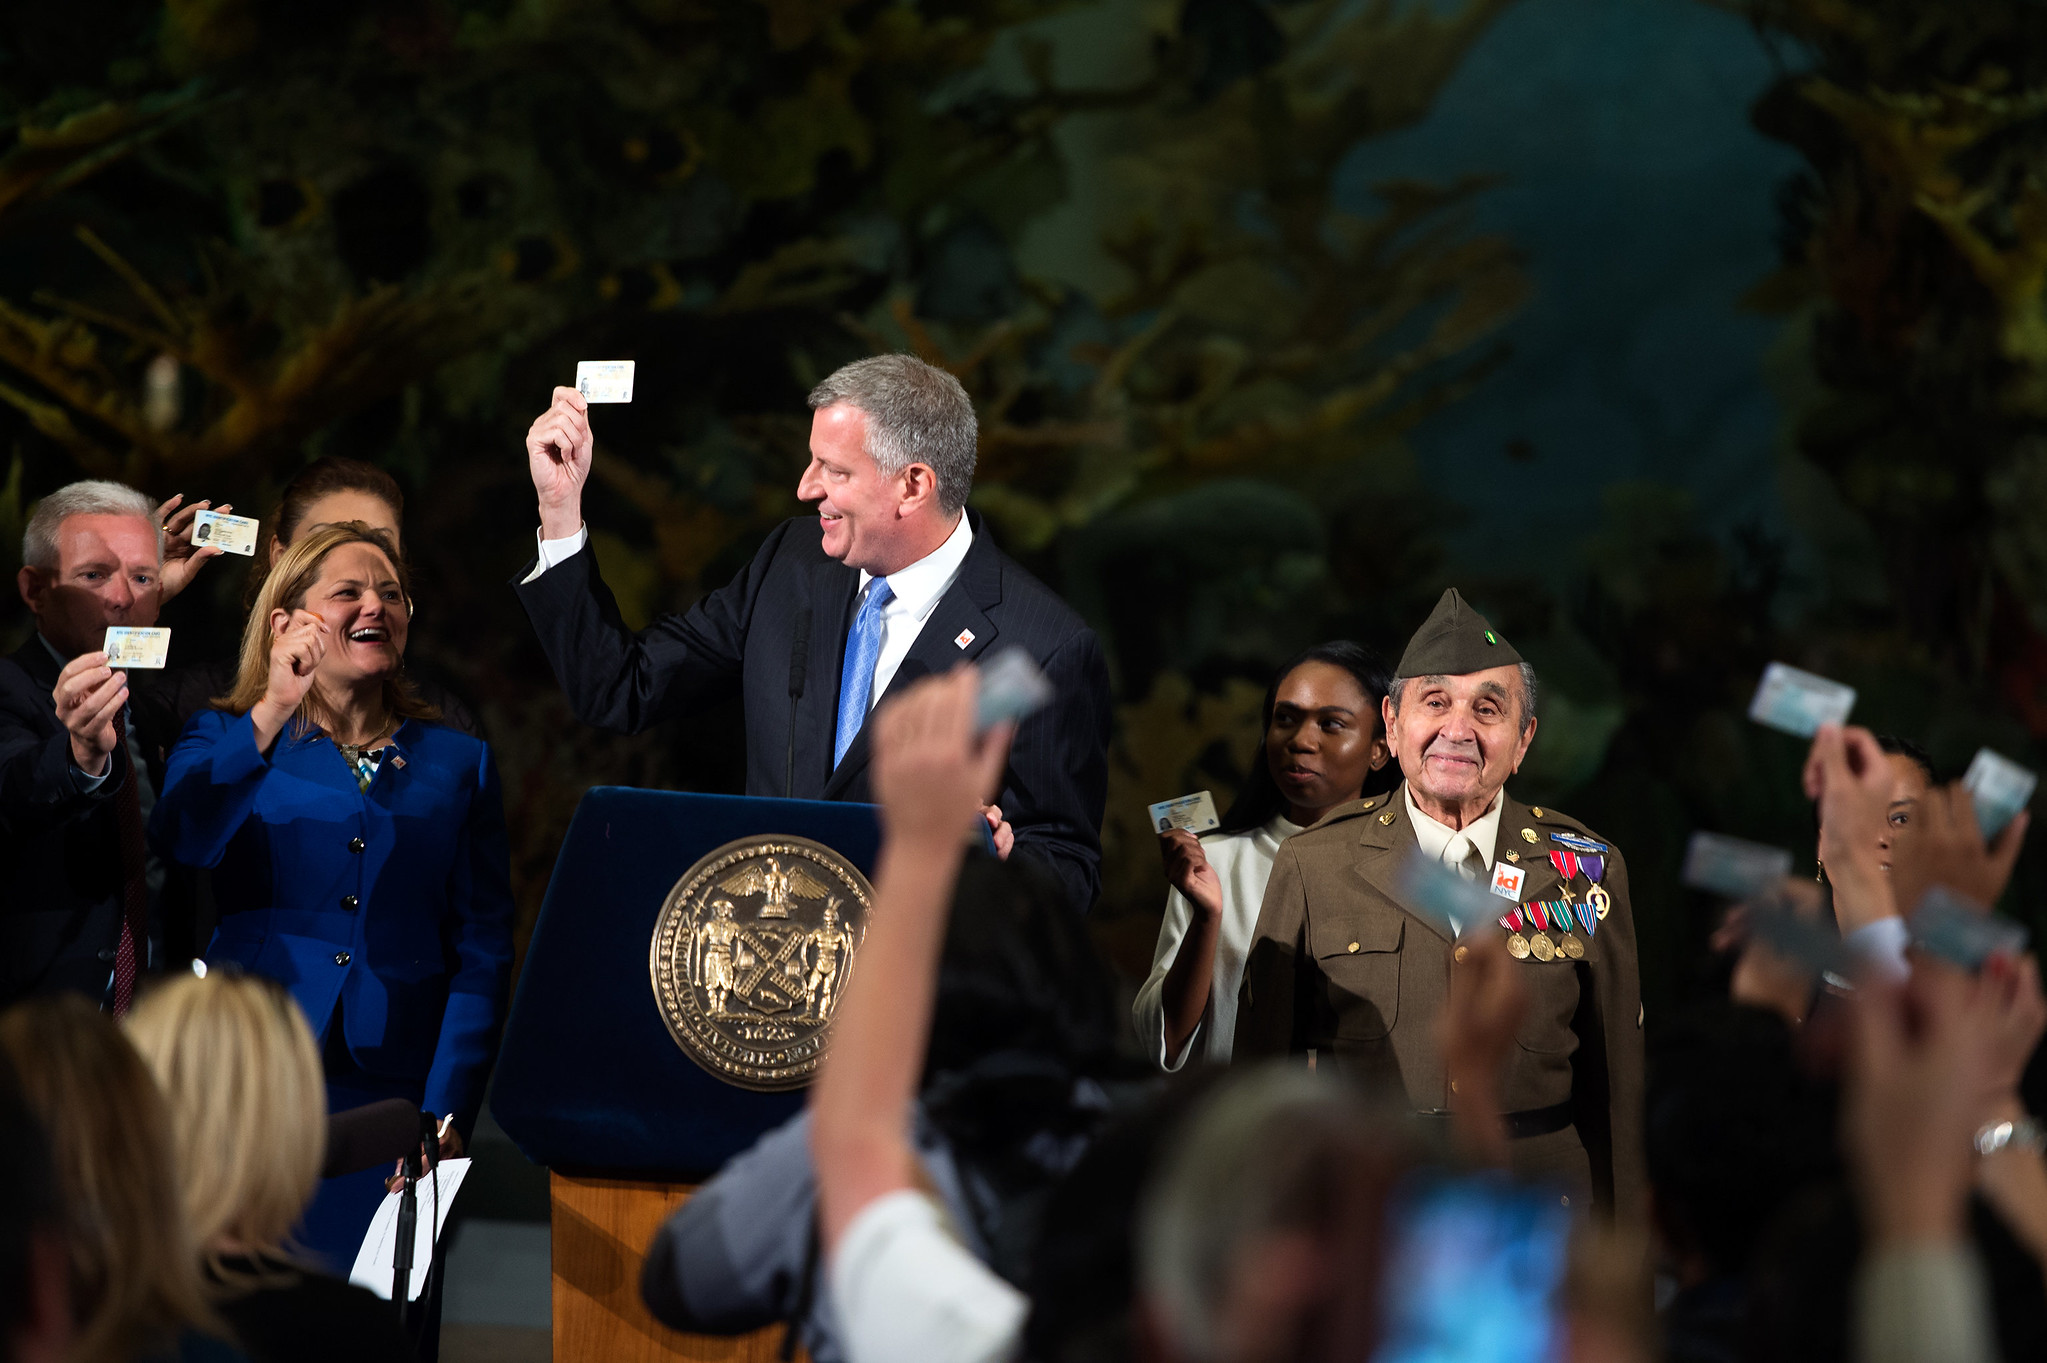 Former Mayor Bill de Blasio holding an IDNYC card as others also display theirs.